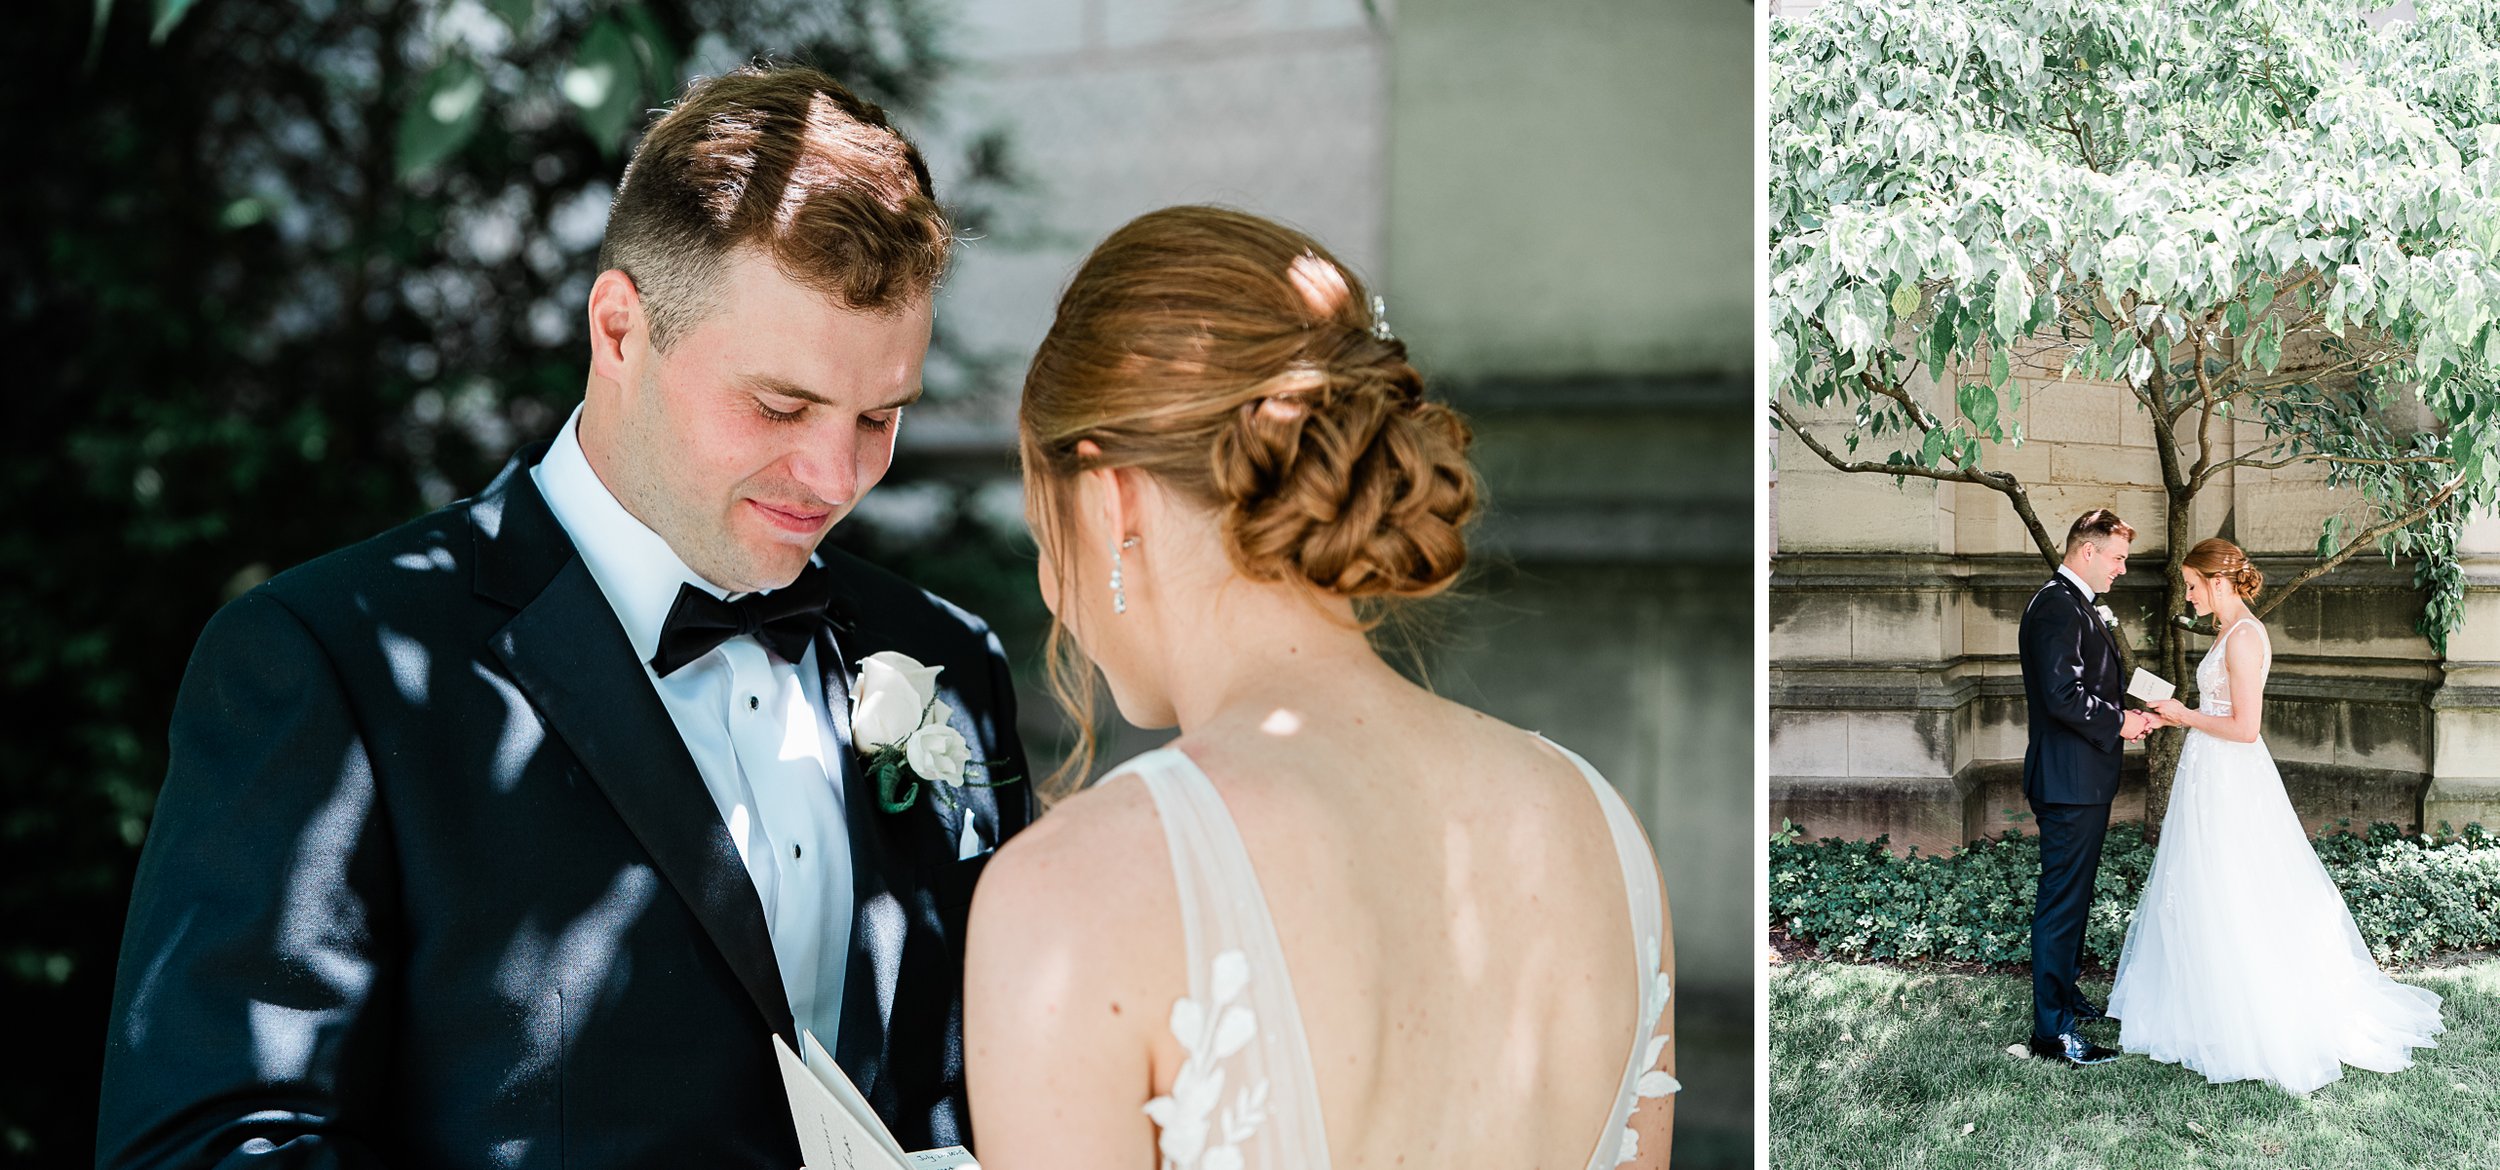 Private Vows, Pittsburgh Wedding Photographer.jpg